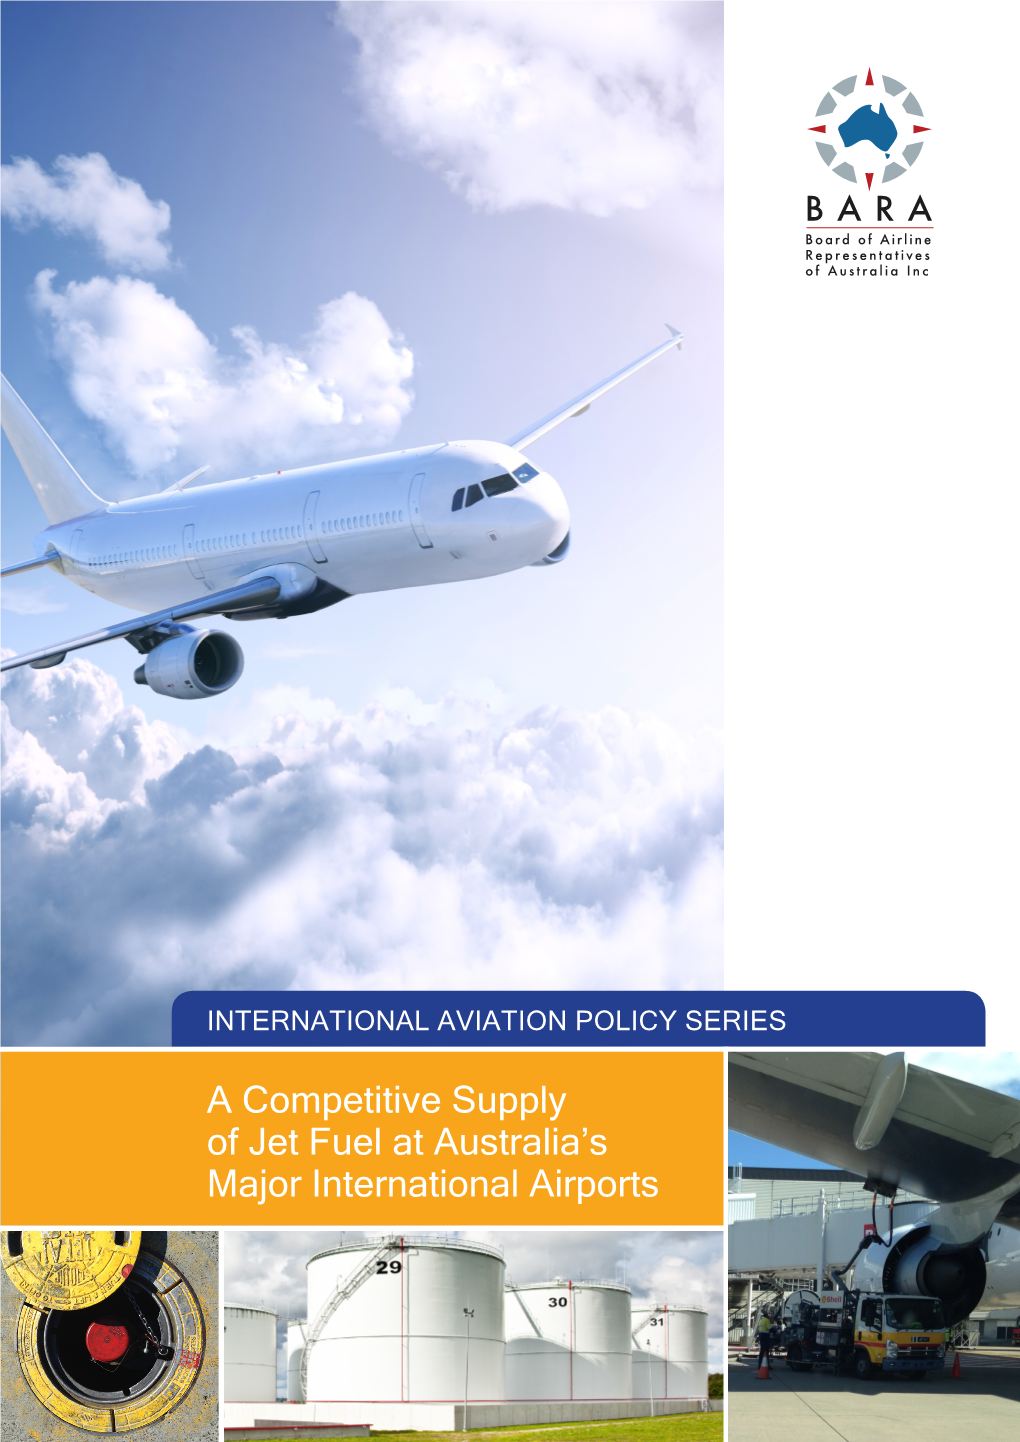 A Competitive Supply of Jet Fuel at Australia's Major International Airports